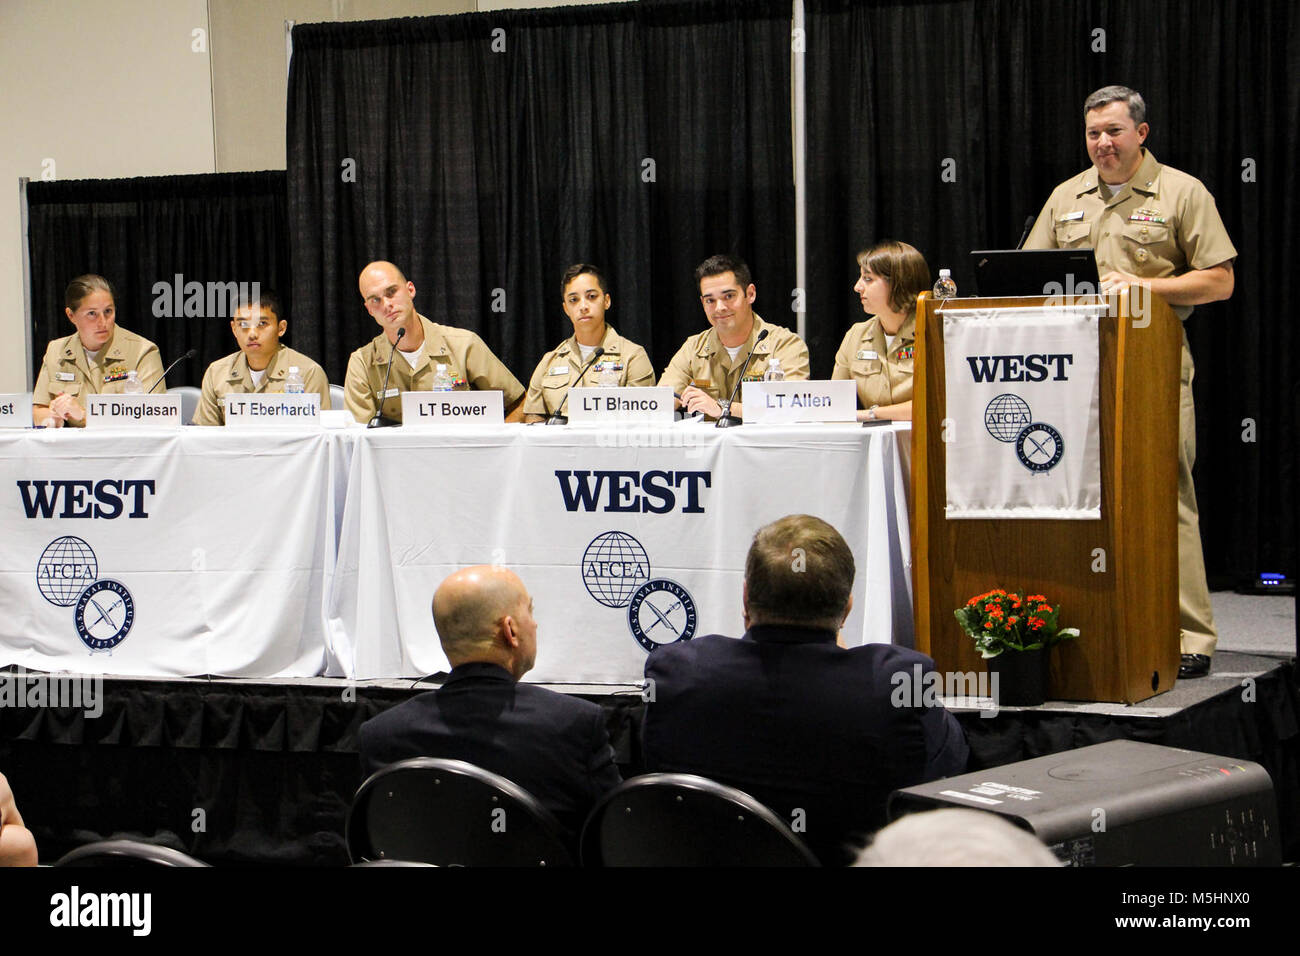 Cmdr. Jeff Heames, right, assistant chief of staff for operations and training at Naval Surface and Mine Warfighting Development Center (SMWDC), responds to a question during a Warfare Tactics Instructor (WTI) panel discussion during WEST 2018, a three-day conference co-sponsored by Armed Forces Communications and Electronics Association (AFCEA) and U.S. Naval Institute (USNI). SMWDC is one of the Navy's five Warfighting Development Centers and its mission is to increase the lethality and tactical proficiency of the Surface Force across all domains. (U.S. Navy Stock Photo